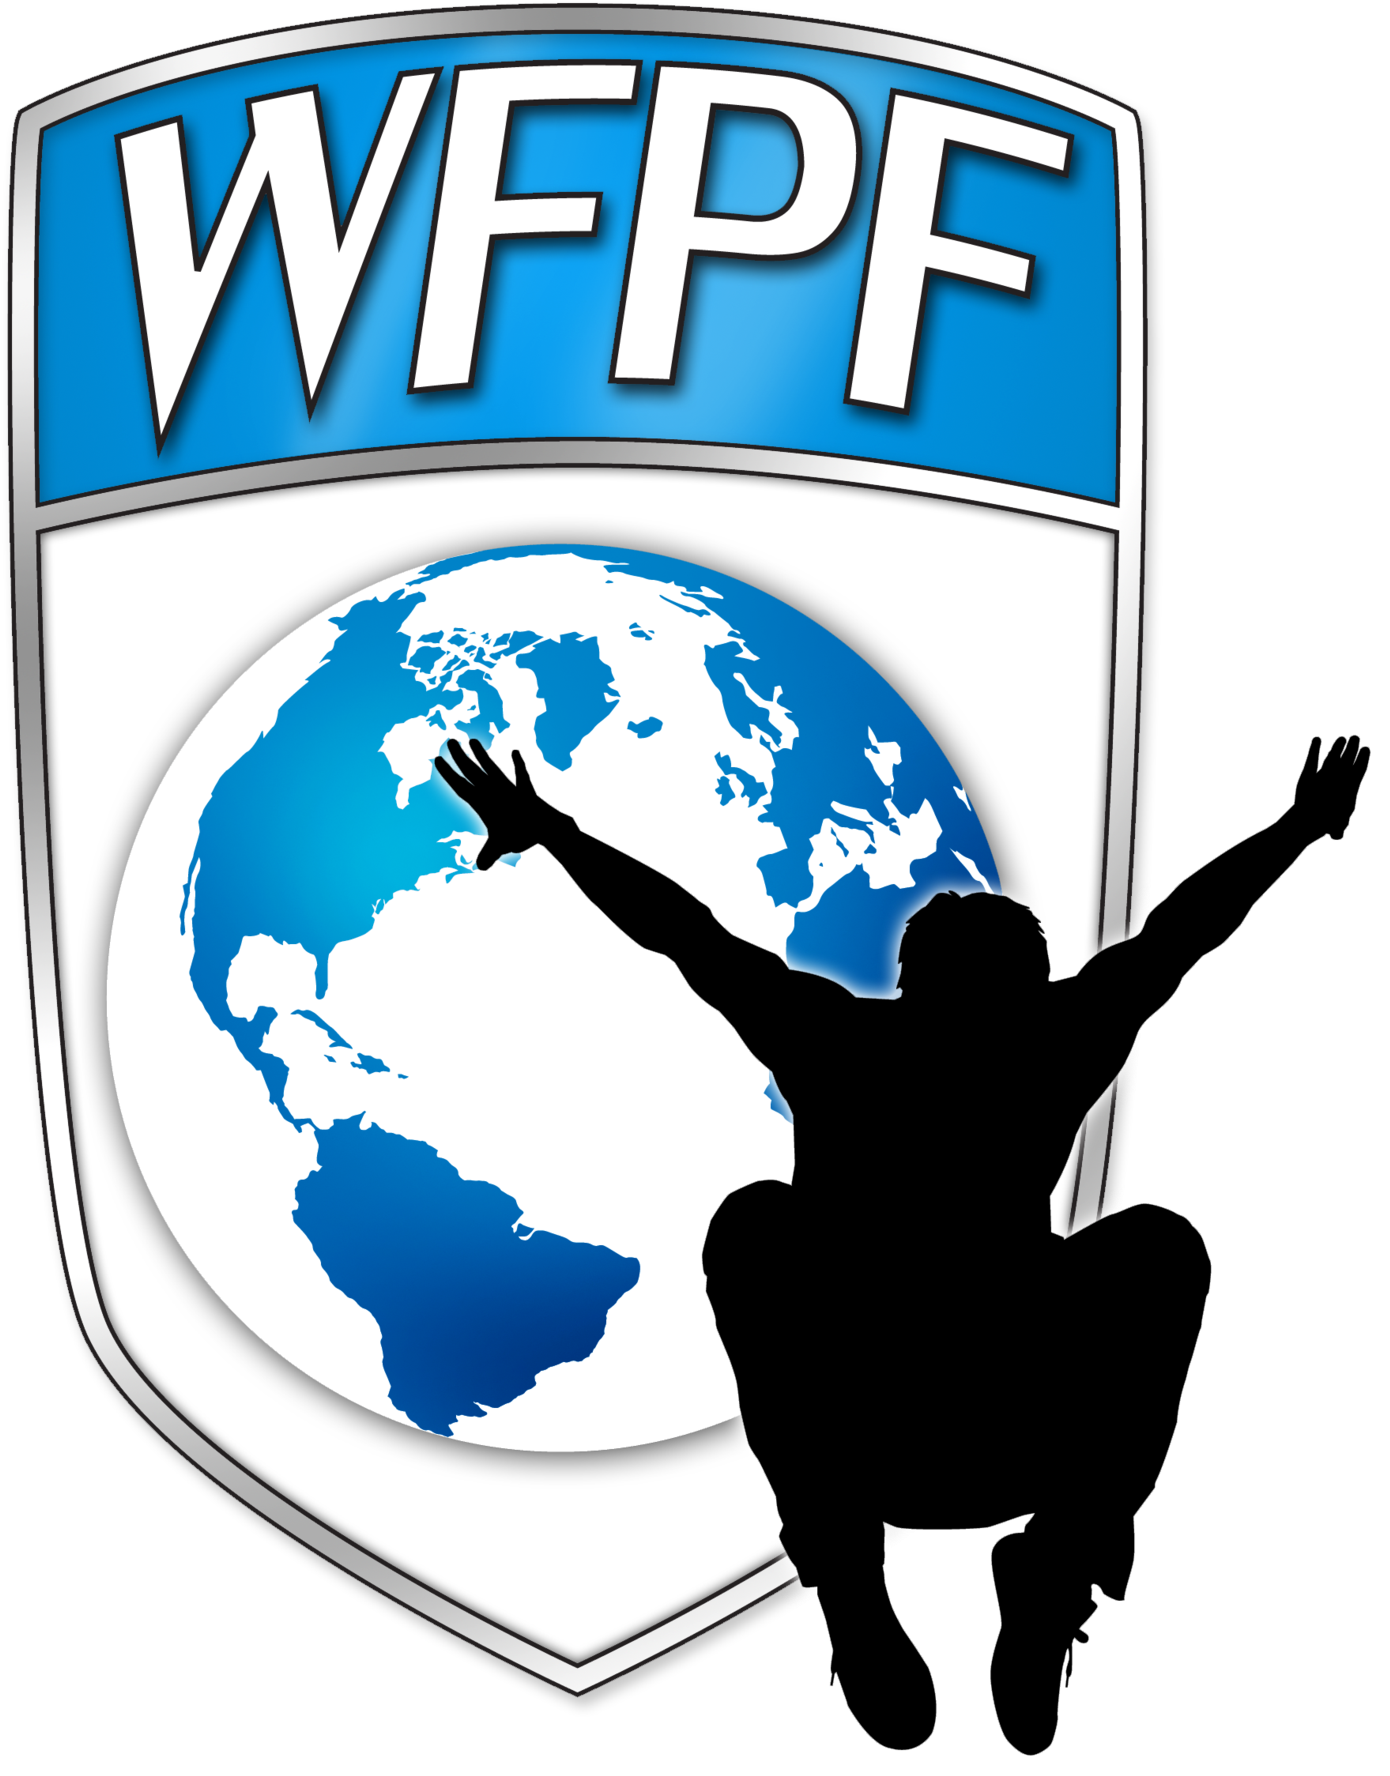 Ko & Wfpf Were Founded Together By A Group Of Guys - World Freerunning And Parkour Federation (1579x2048)